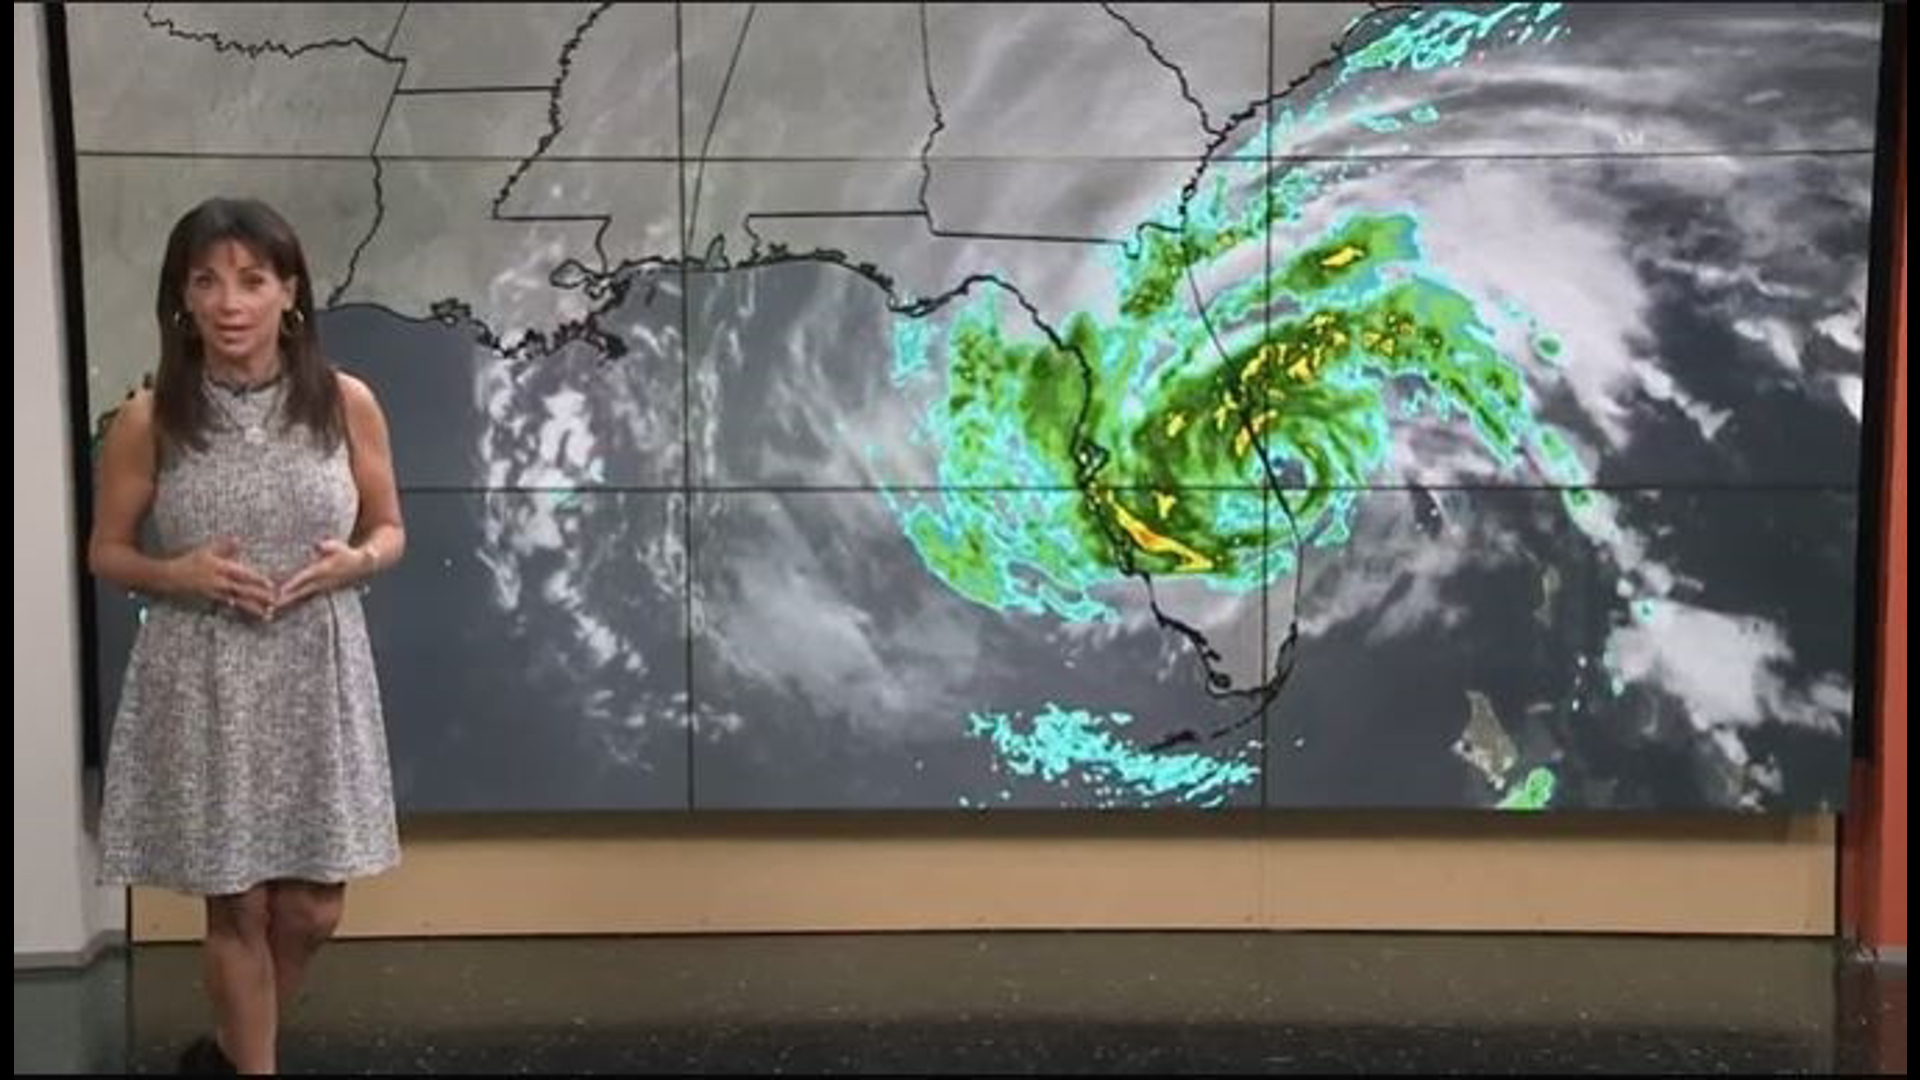 Nicole made its first U.S. landfall along Florida's east coast early Thursday morning as a Category 1 storm, the National Hurricane Center said.